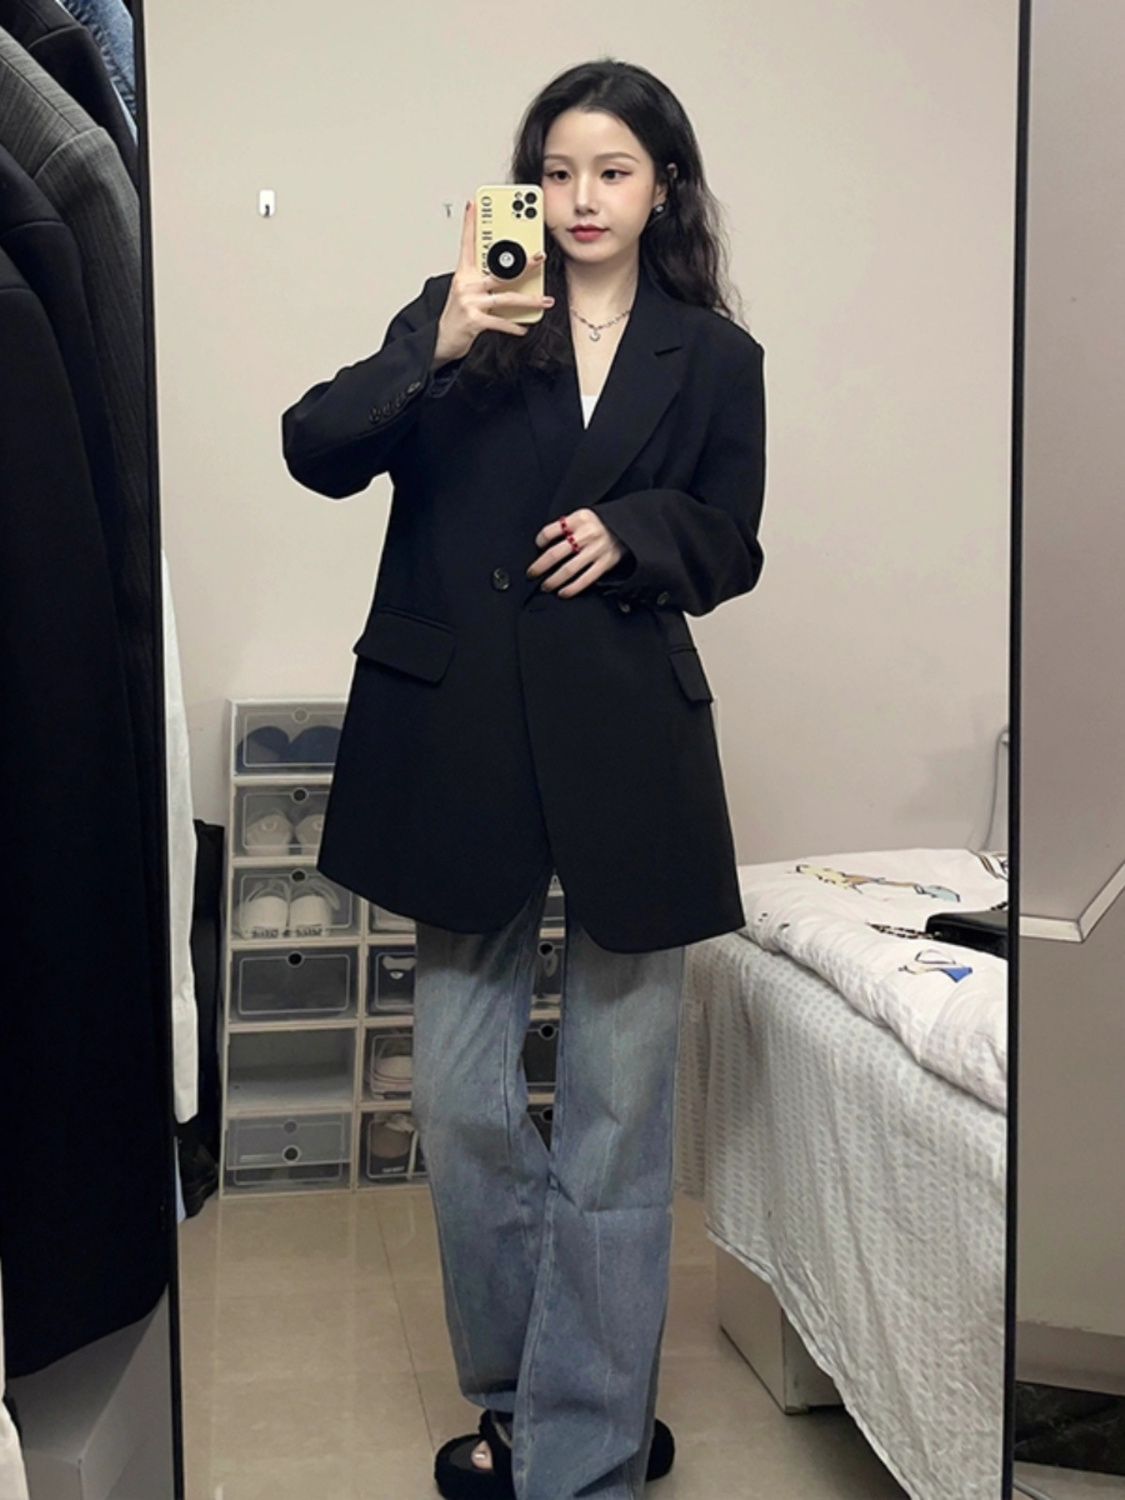 Black suit jacket for women spring and autumn new Korean style high-end fashion versatile small slim slim suit top trendy